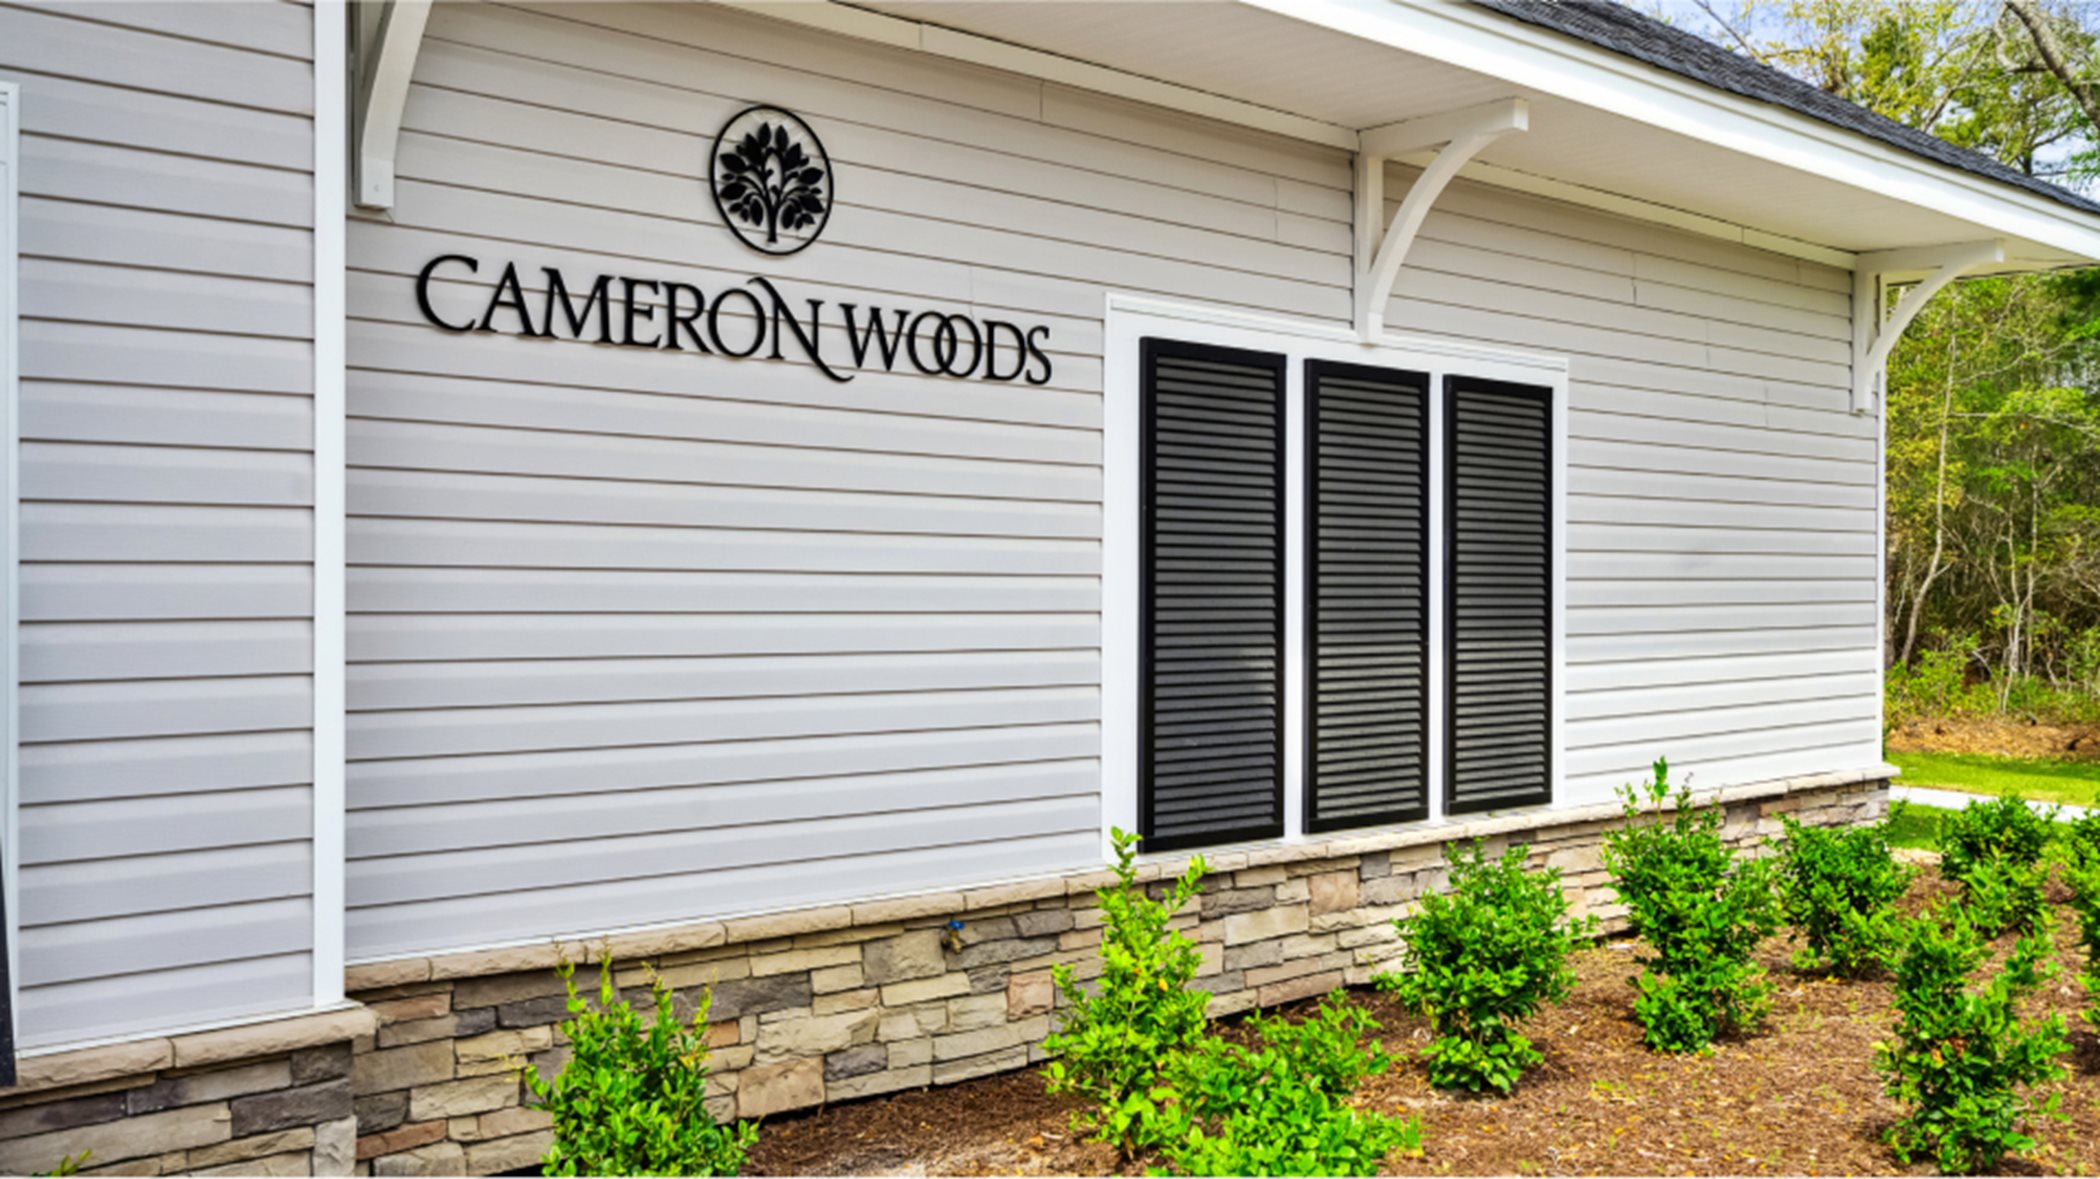 Cameron woods clubhouse